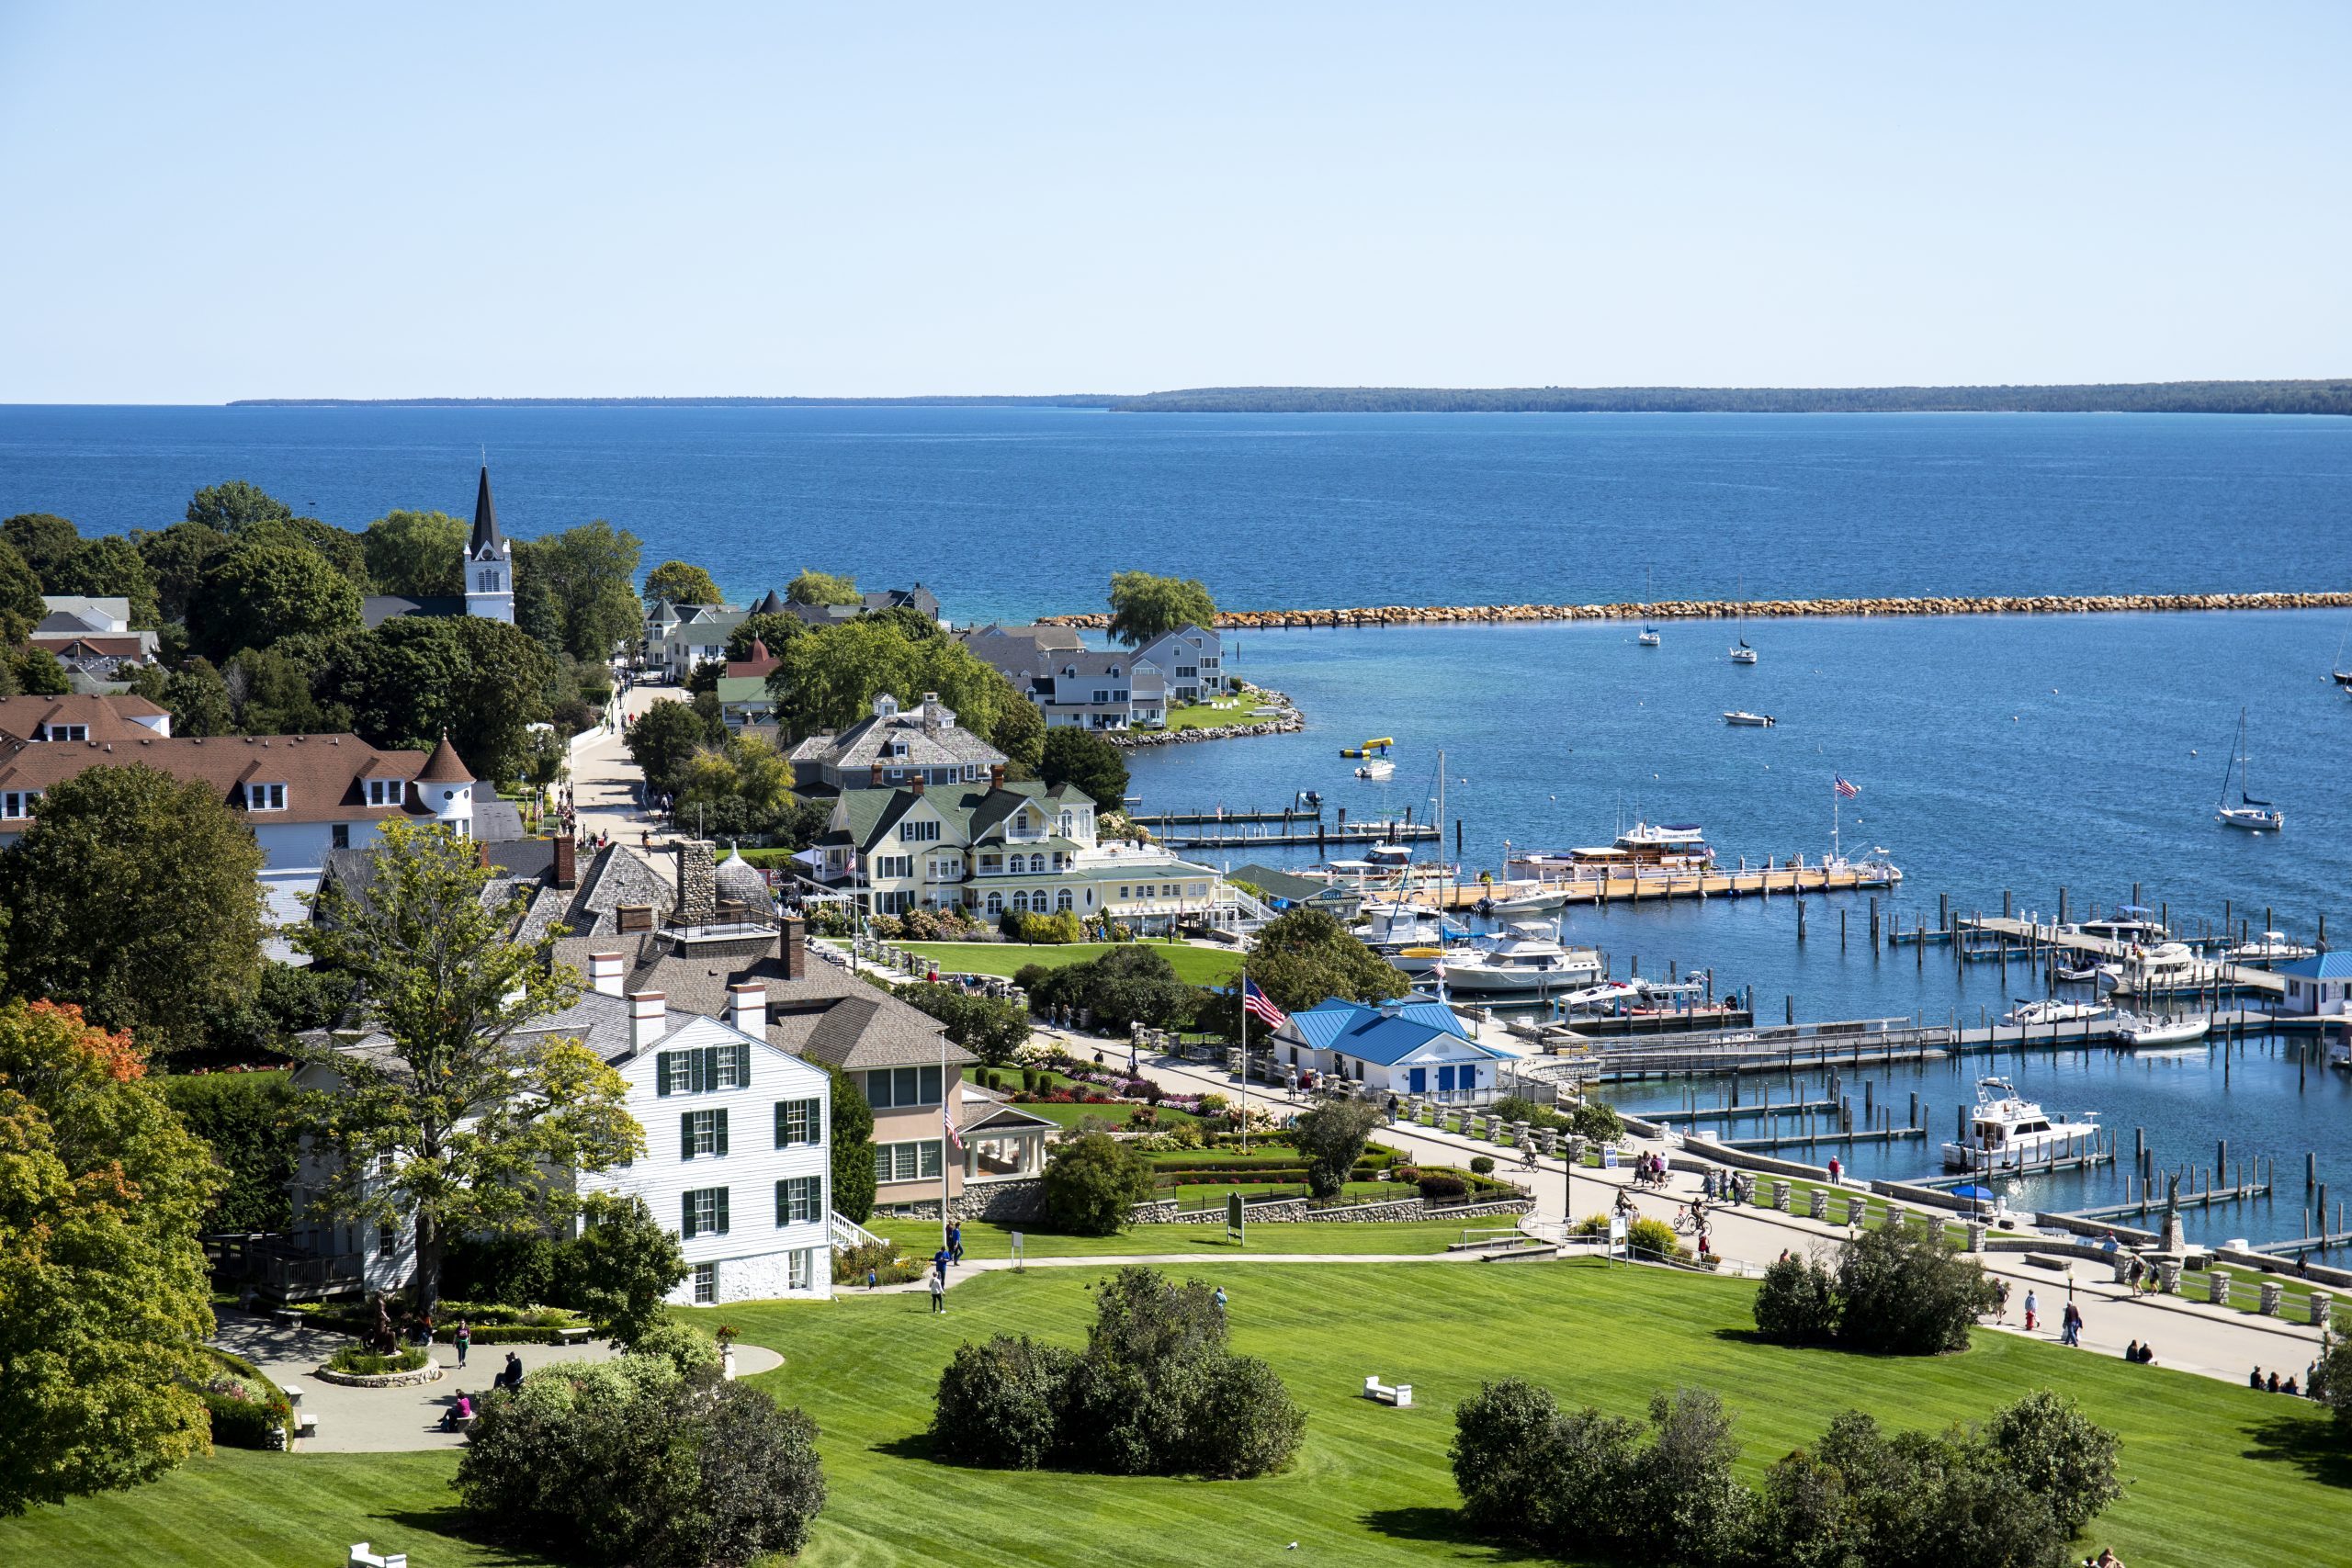 A view of Mackinac Island’s harbor overlooking Marquette Park from Fort Mackinac up on the bluff